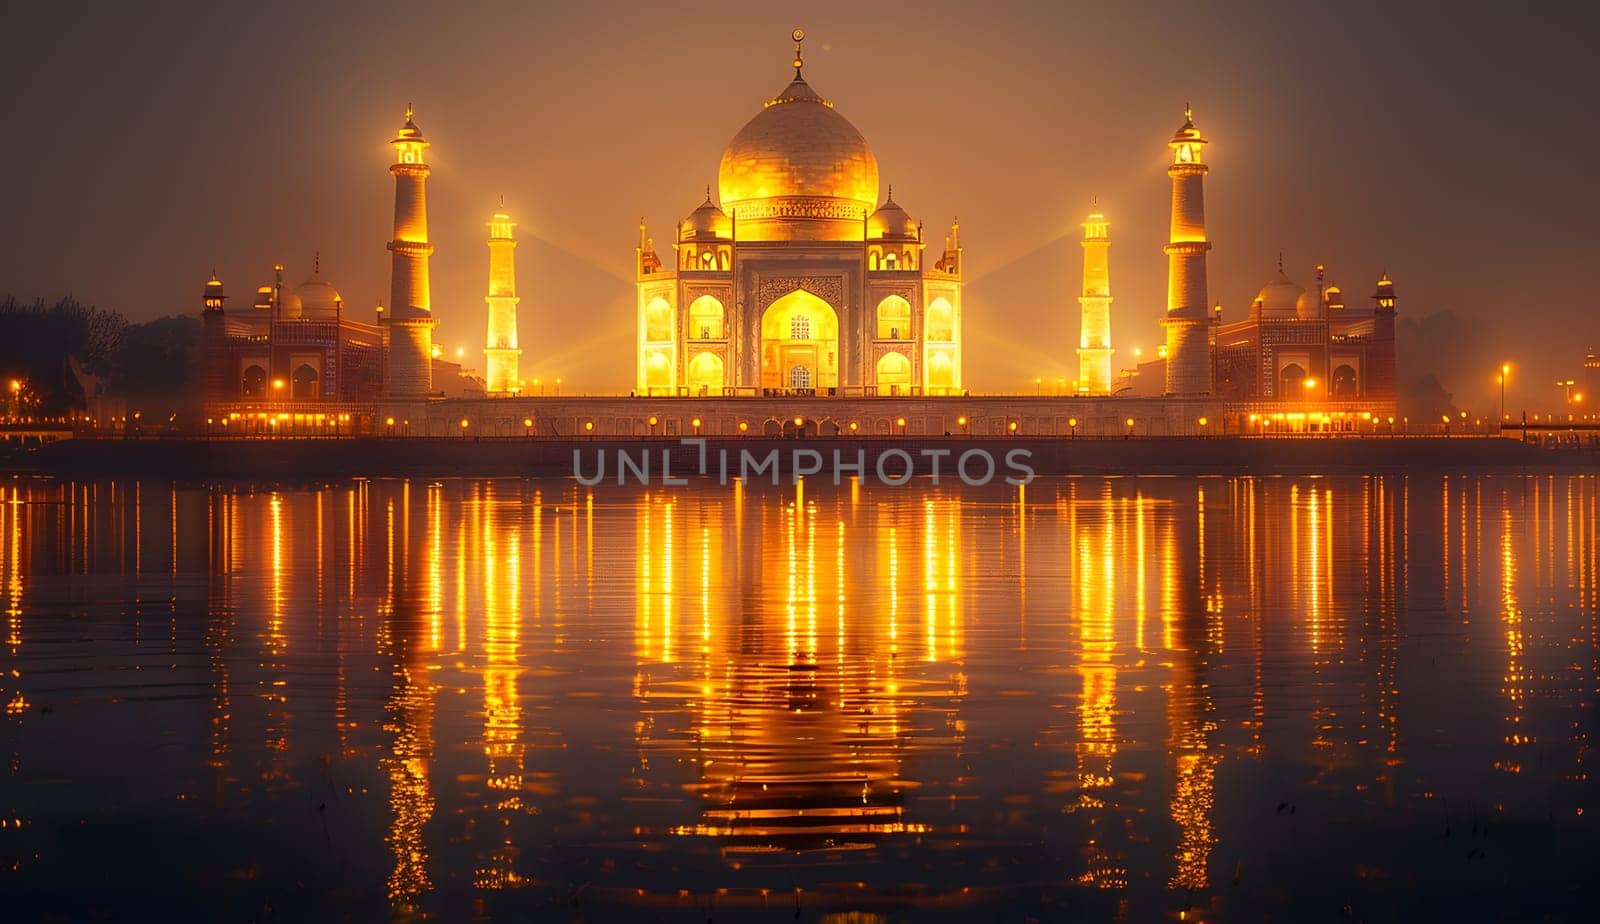 The Taj Mahal illuminates the night sky and is mirrored in the tranquil waters of the nearby lake, creating a breathtaking sight at dusk